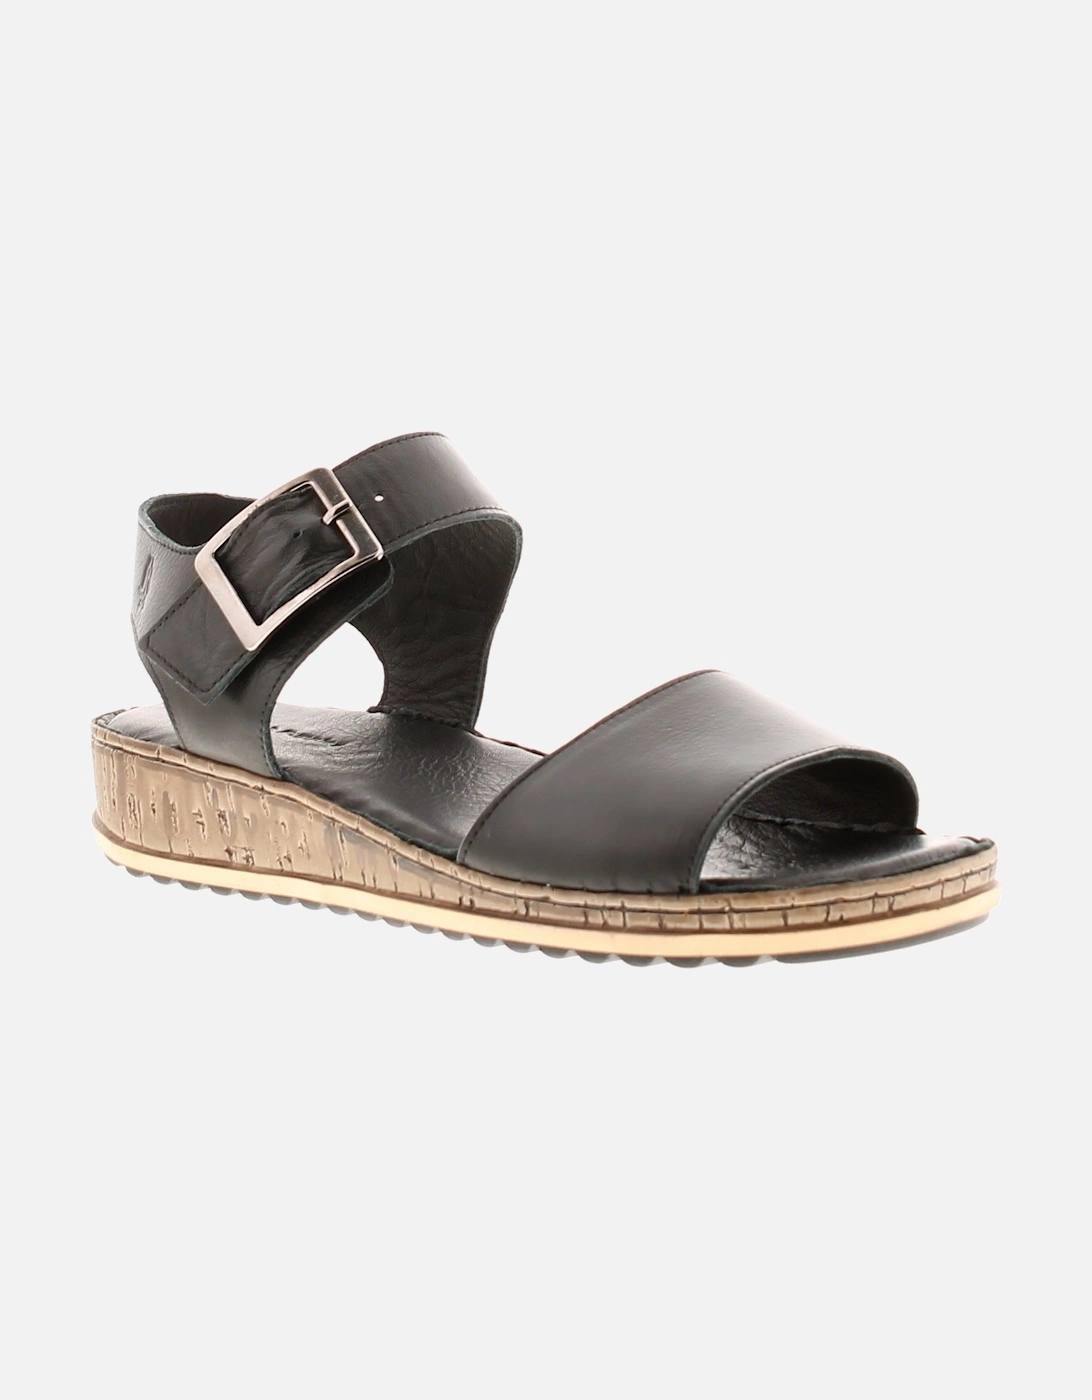 Womens Sandals Wedge Ellie Leather Buckle black UK Size, 6 of 5